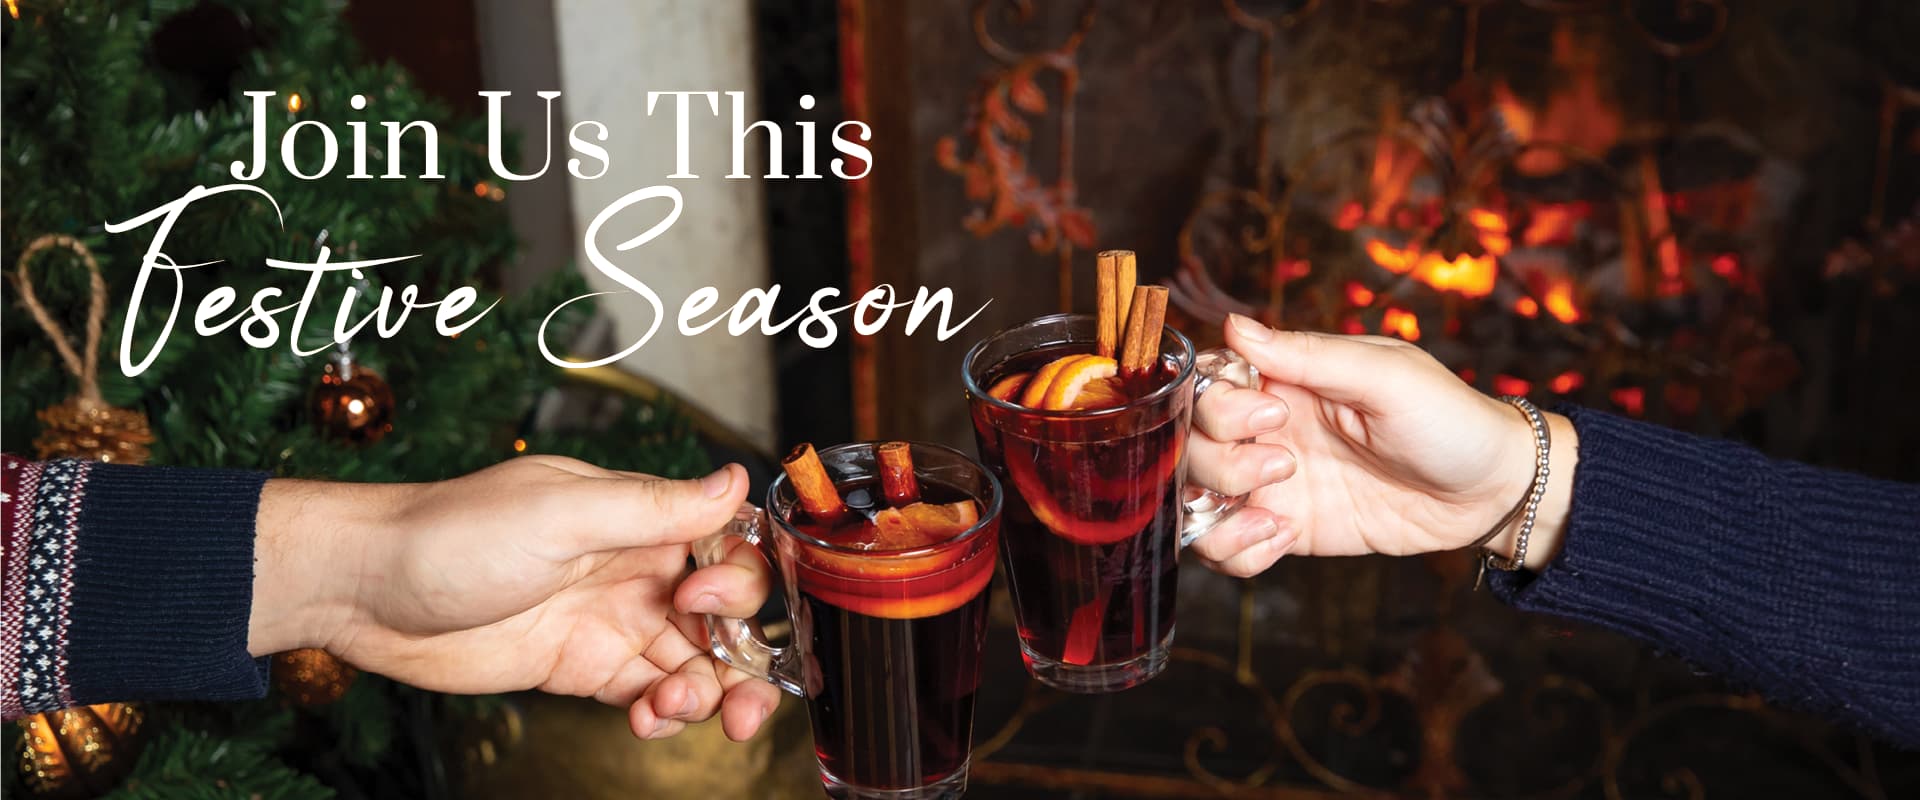 join us this festive season at Woodman | Mulled Wine